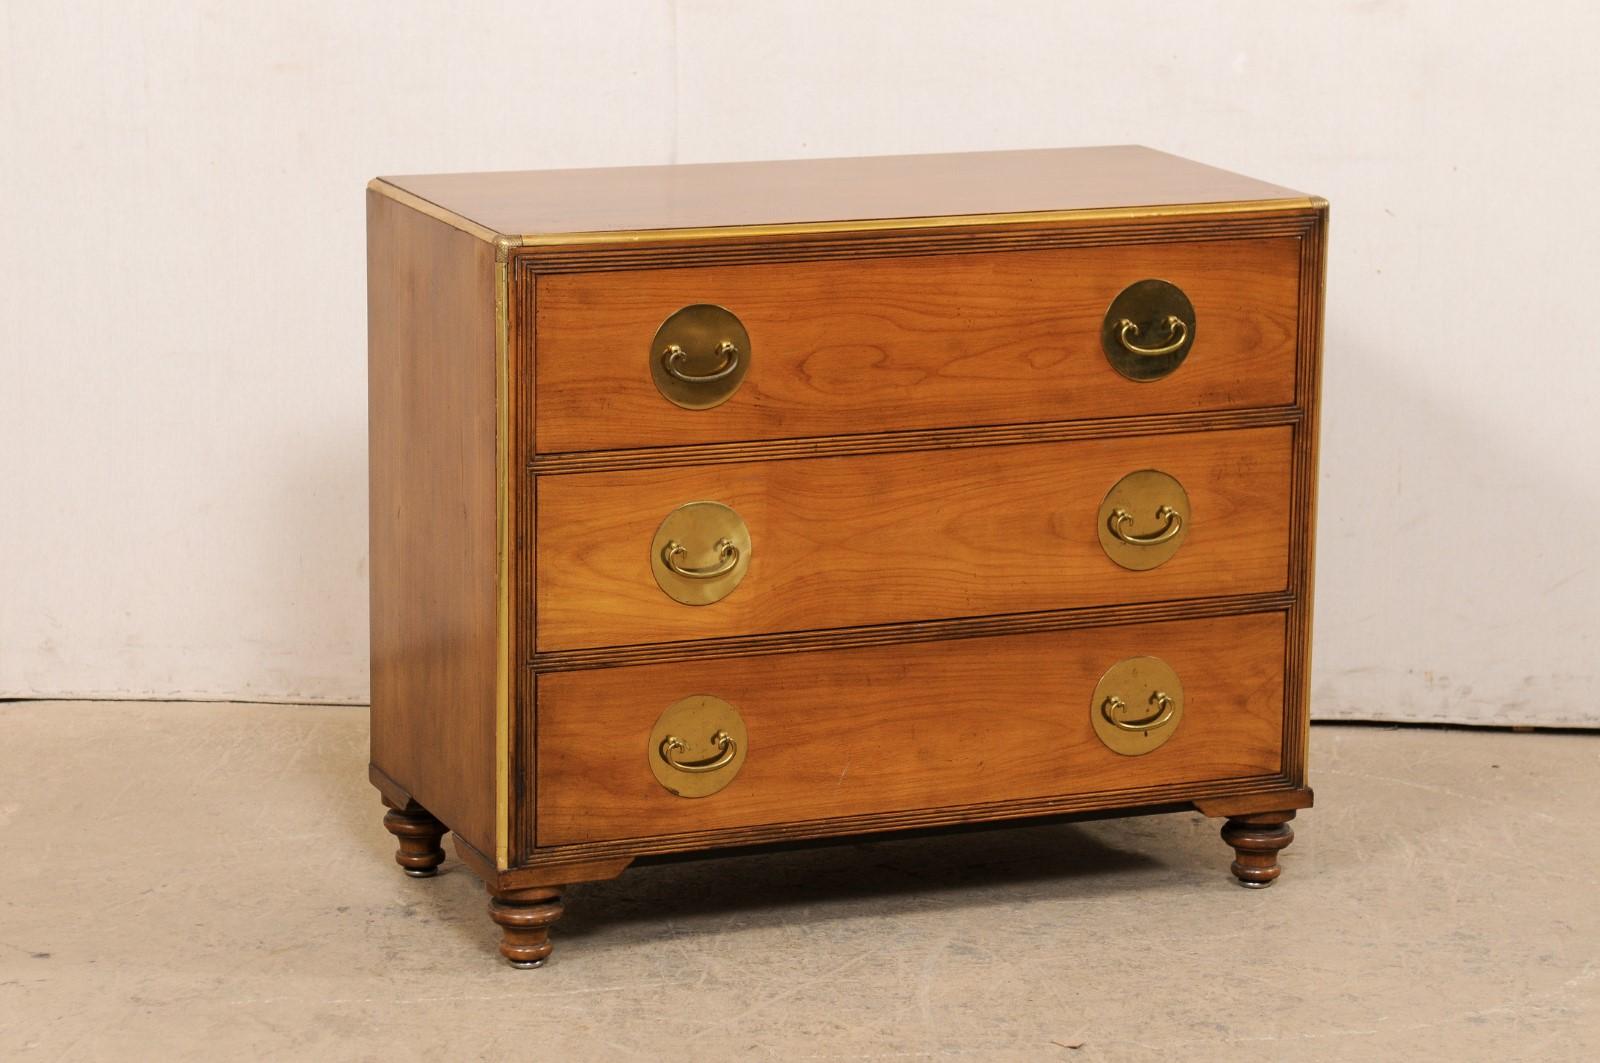 An American mid-century chest of three-drawers with brass accents. This mid 20th century chest has a rectangular-shaped top with edging along front and two sides being trimmed in brass, atop a case which houses three full-sized graduated and